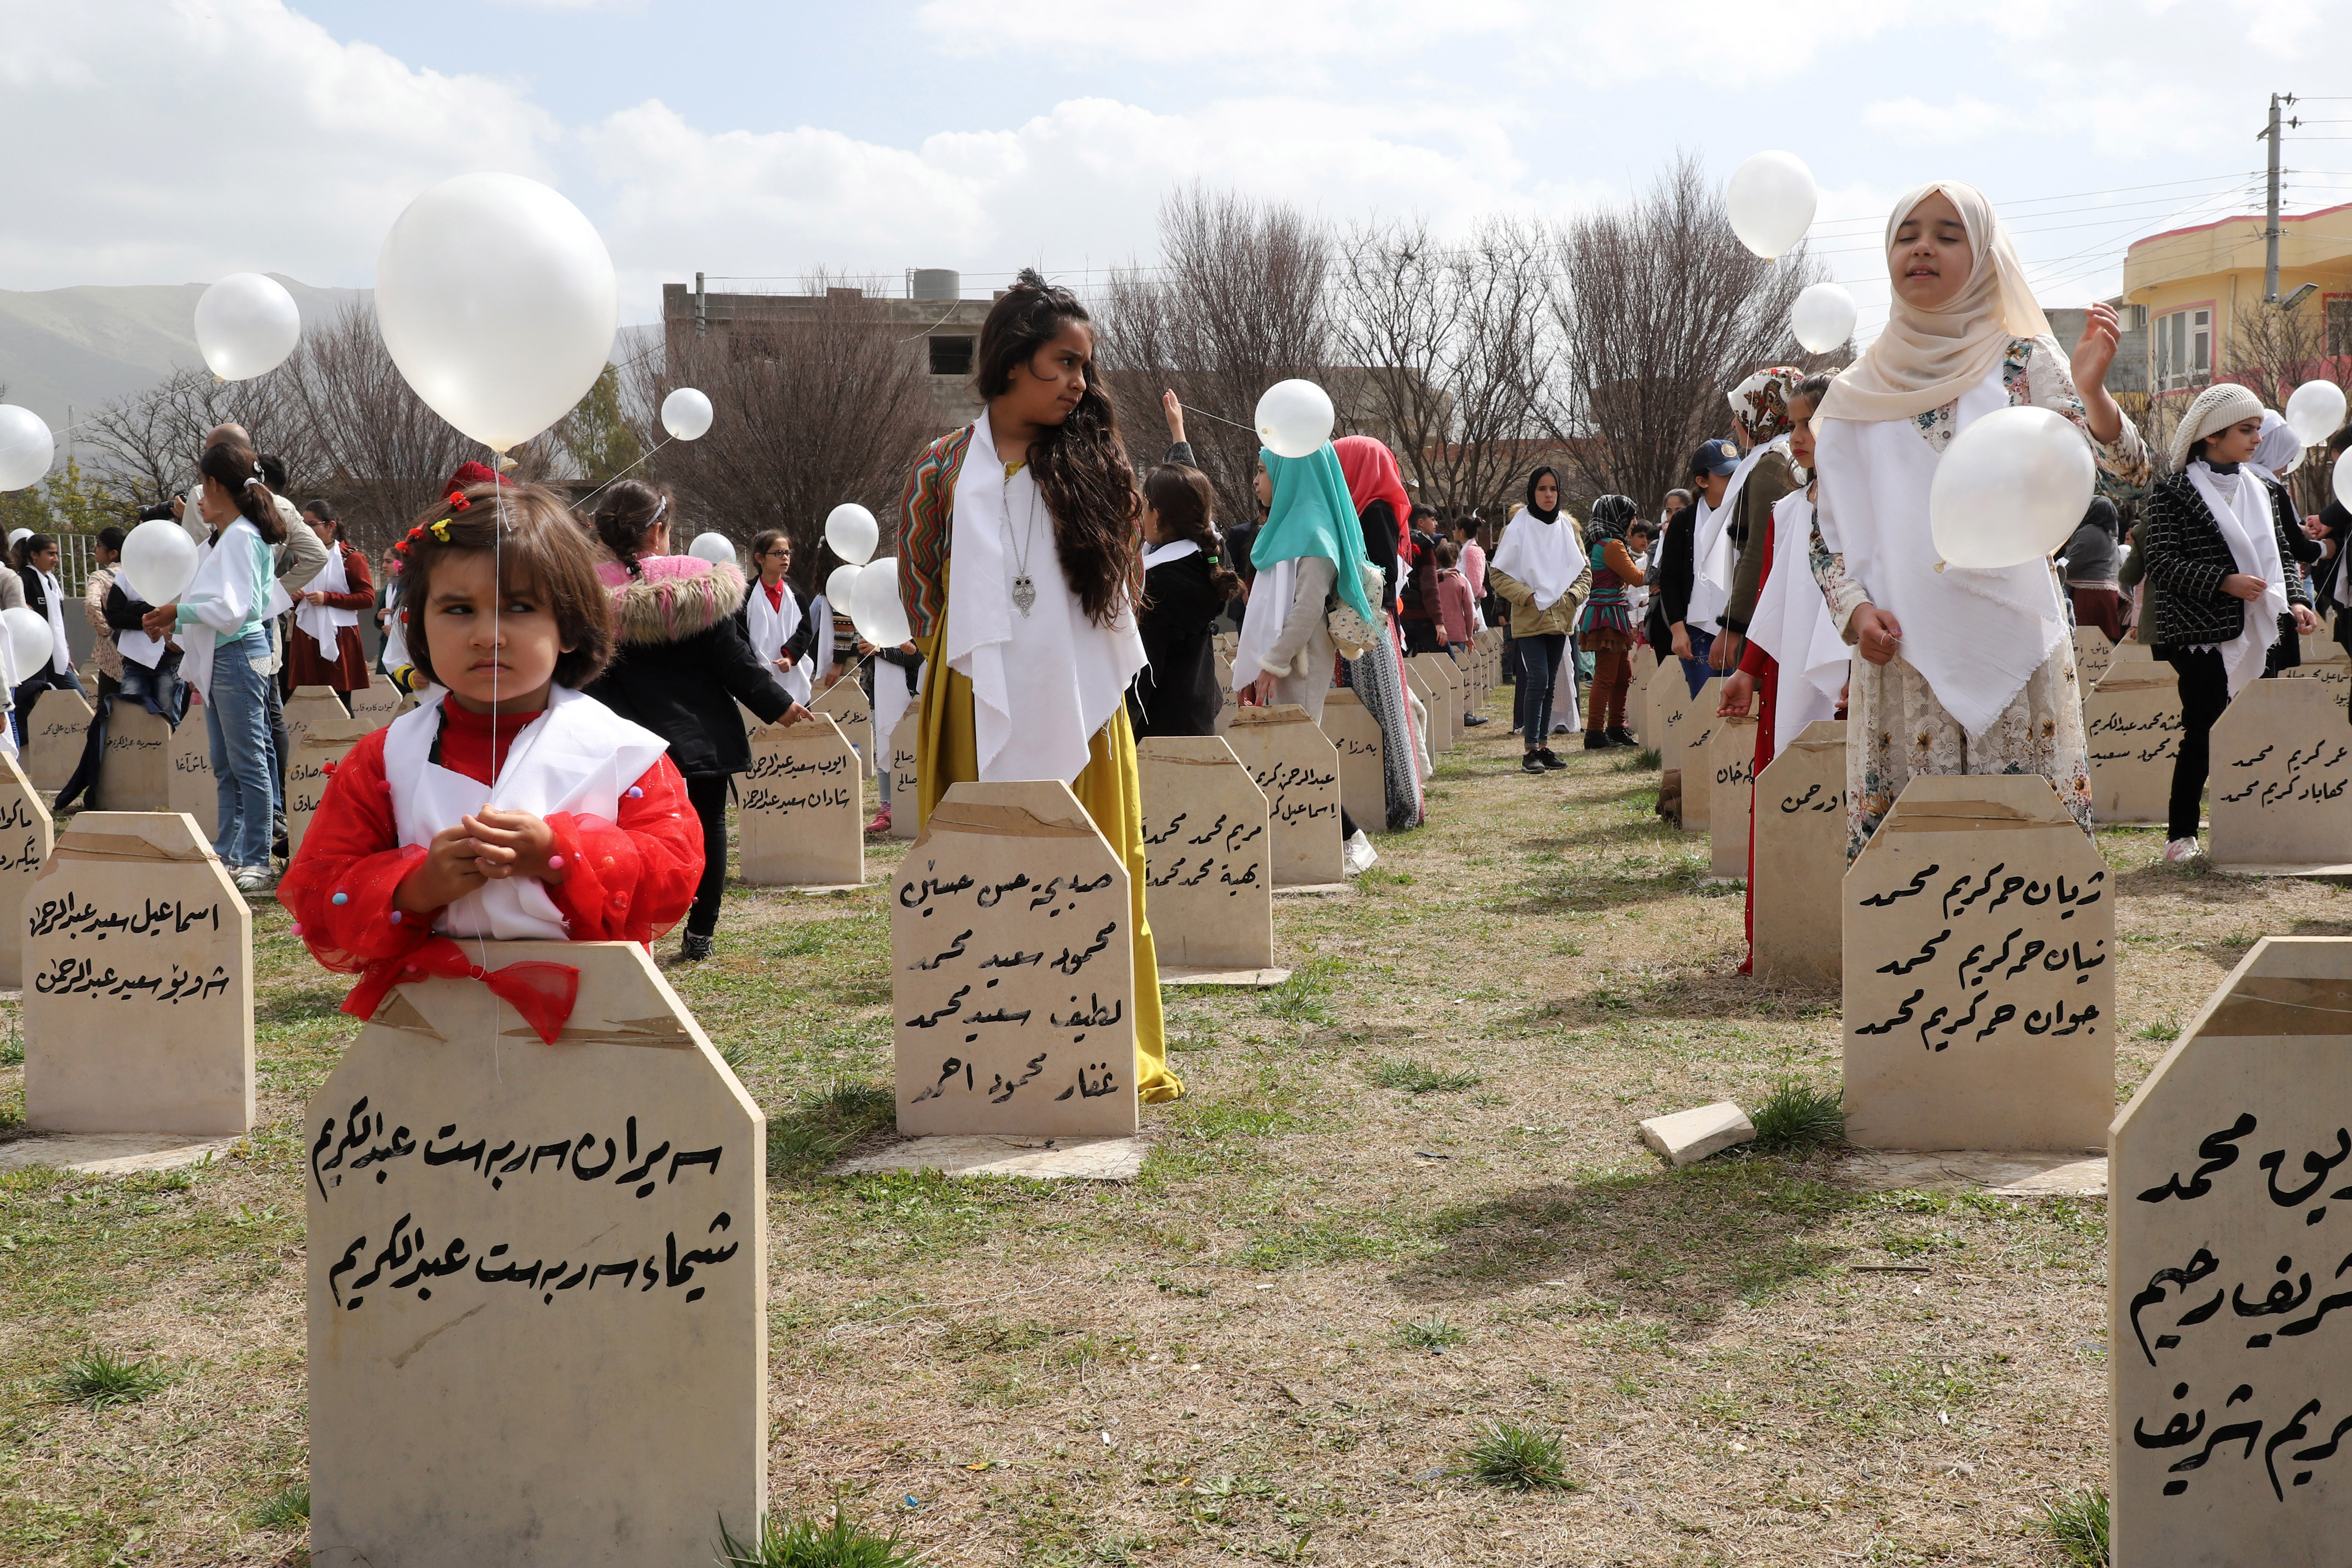 Iraqi-Kurds visit a grave site in Halabja near the monument for victims of the Halabja gas massacre that killed some 5,000 people as they mark the 31th anniversary of the attack (AFP)